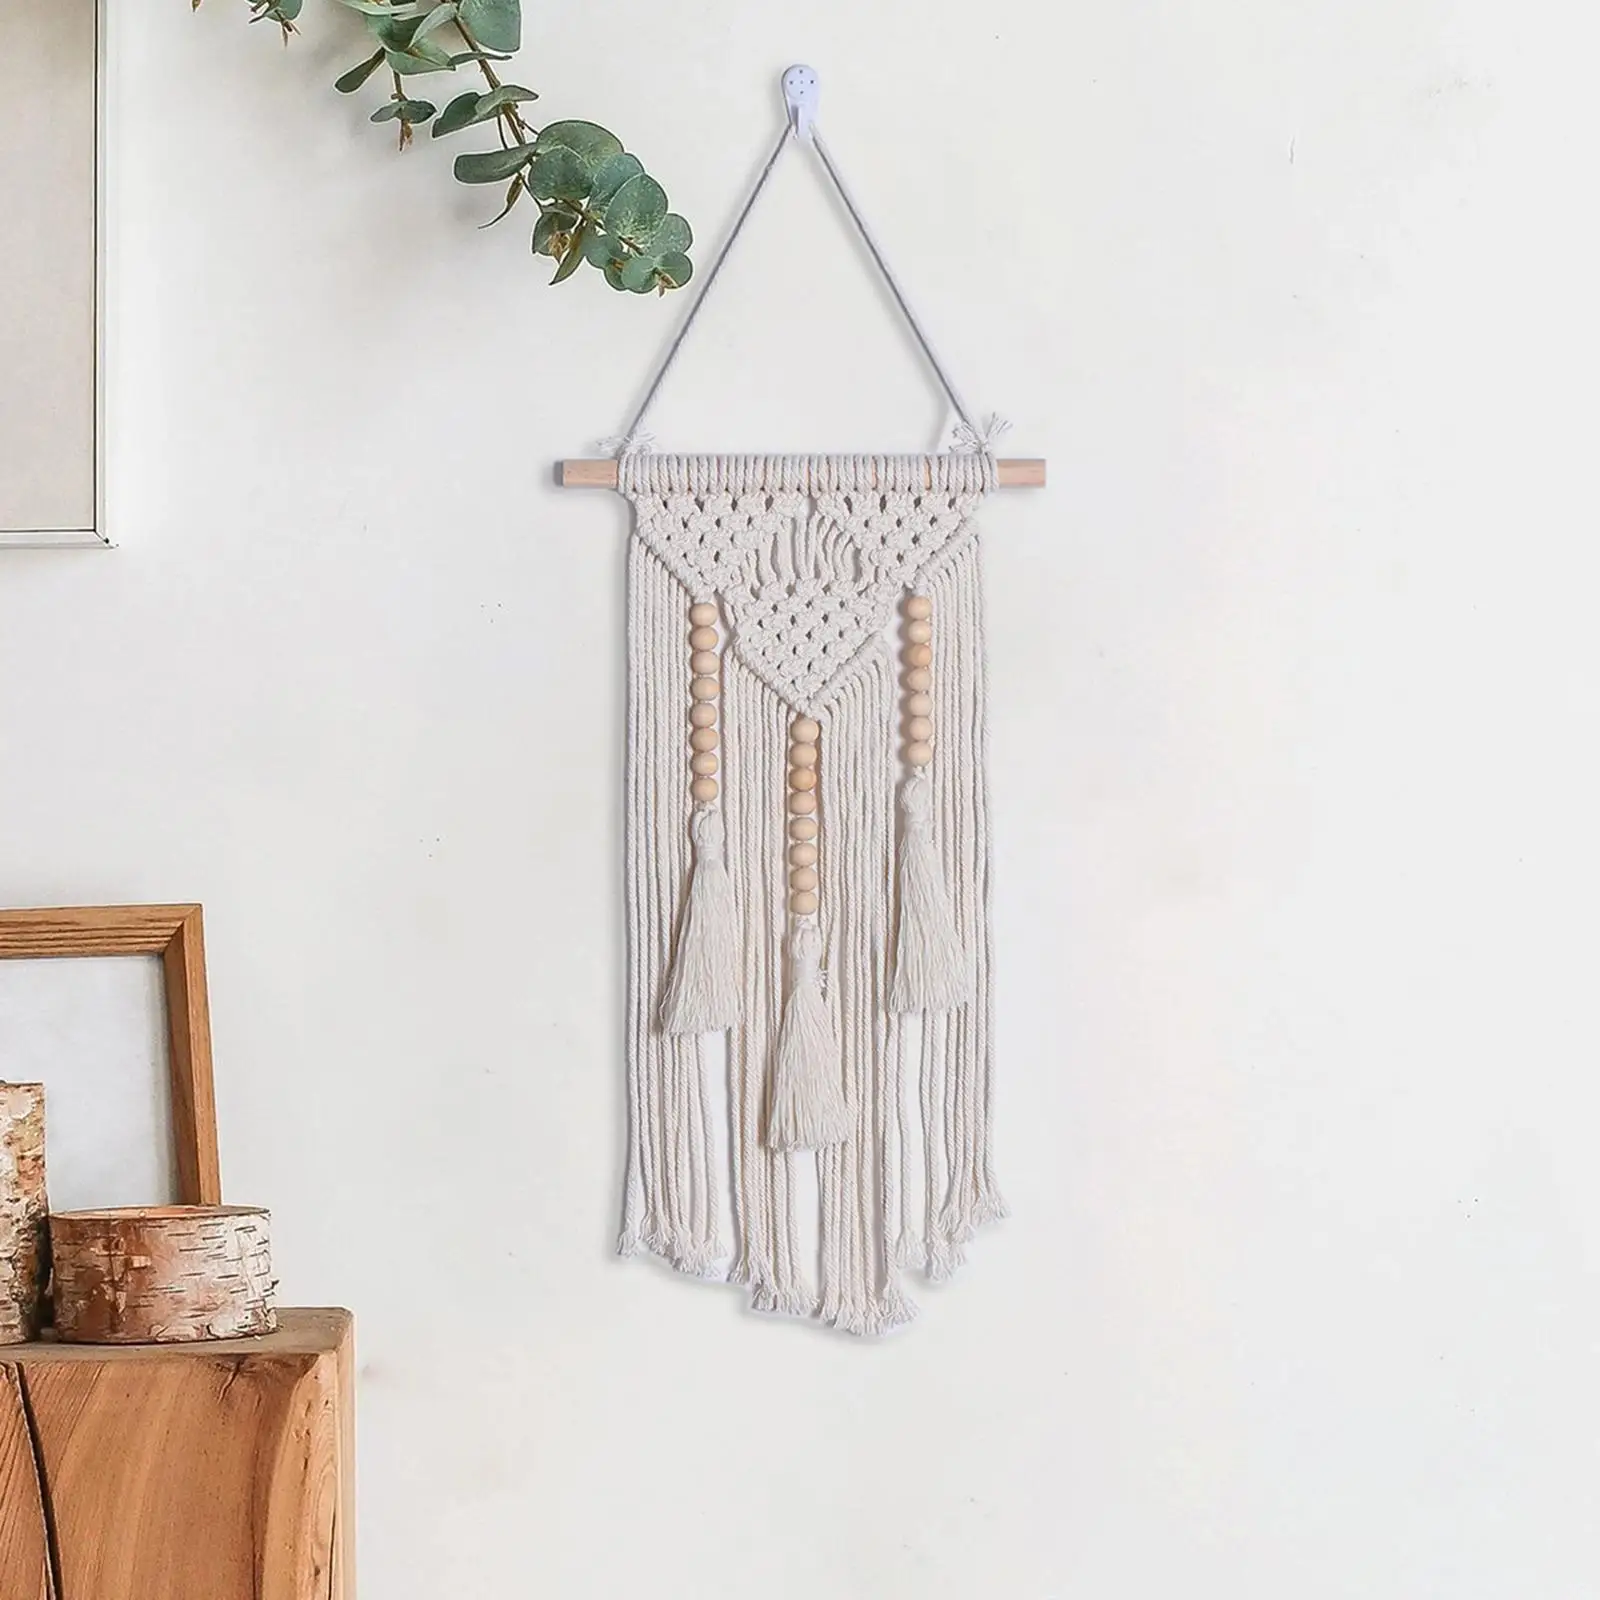 Macrame Wall Hanging Decor with Beads White Boho Wall Decor Woven Wall Art Decor for Wedding Bedroom Bed Dorm Decoration